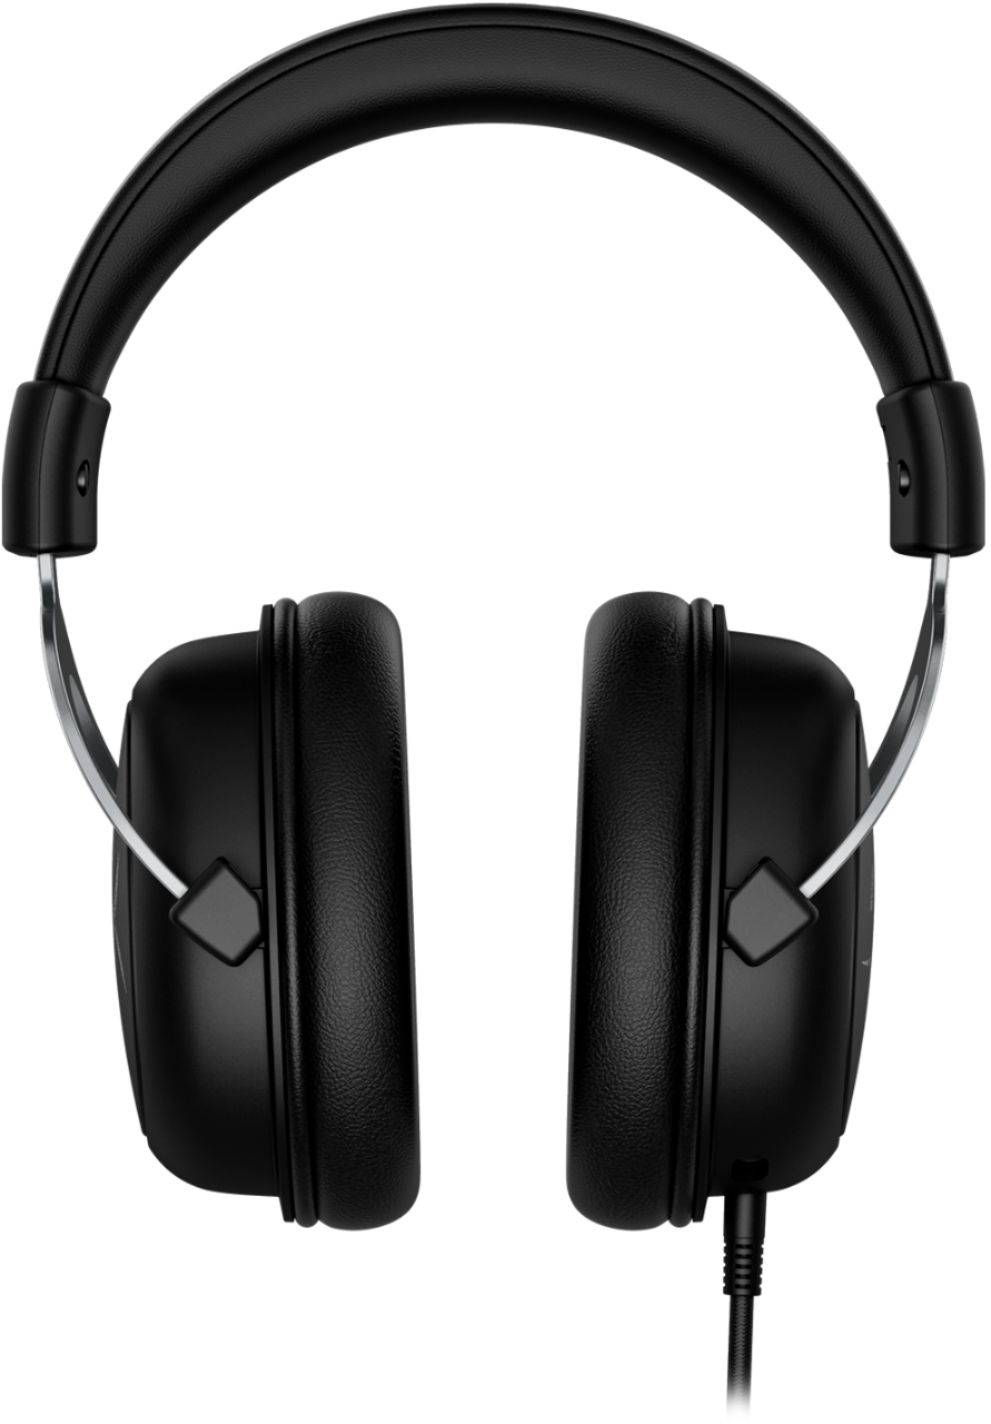 PC Express - HyperX CloudX Chat Headset for Xbox The Officially Xbox  Licensed HyperX CloudX Chat™ Headset is built with a 40mm driver for clear  voice chat communication. It has a flexible